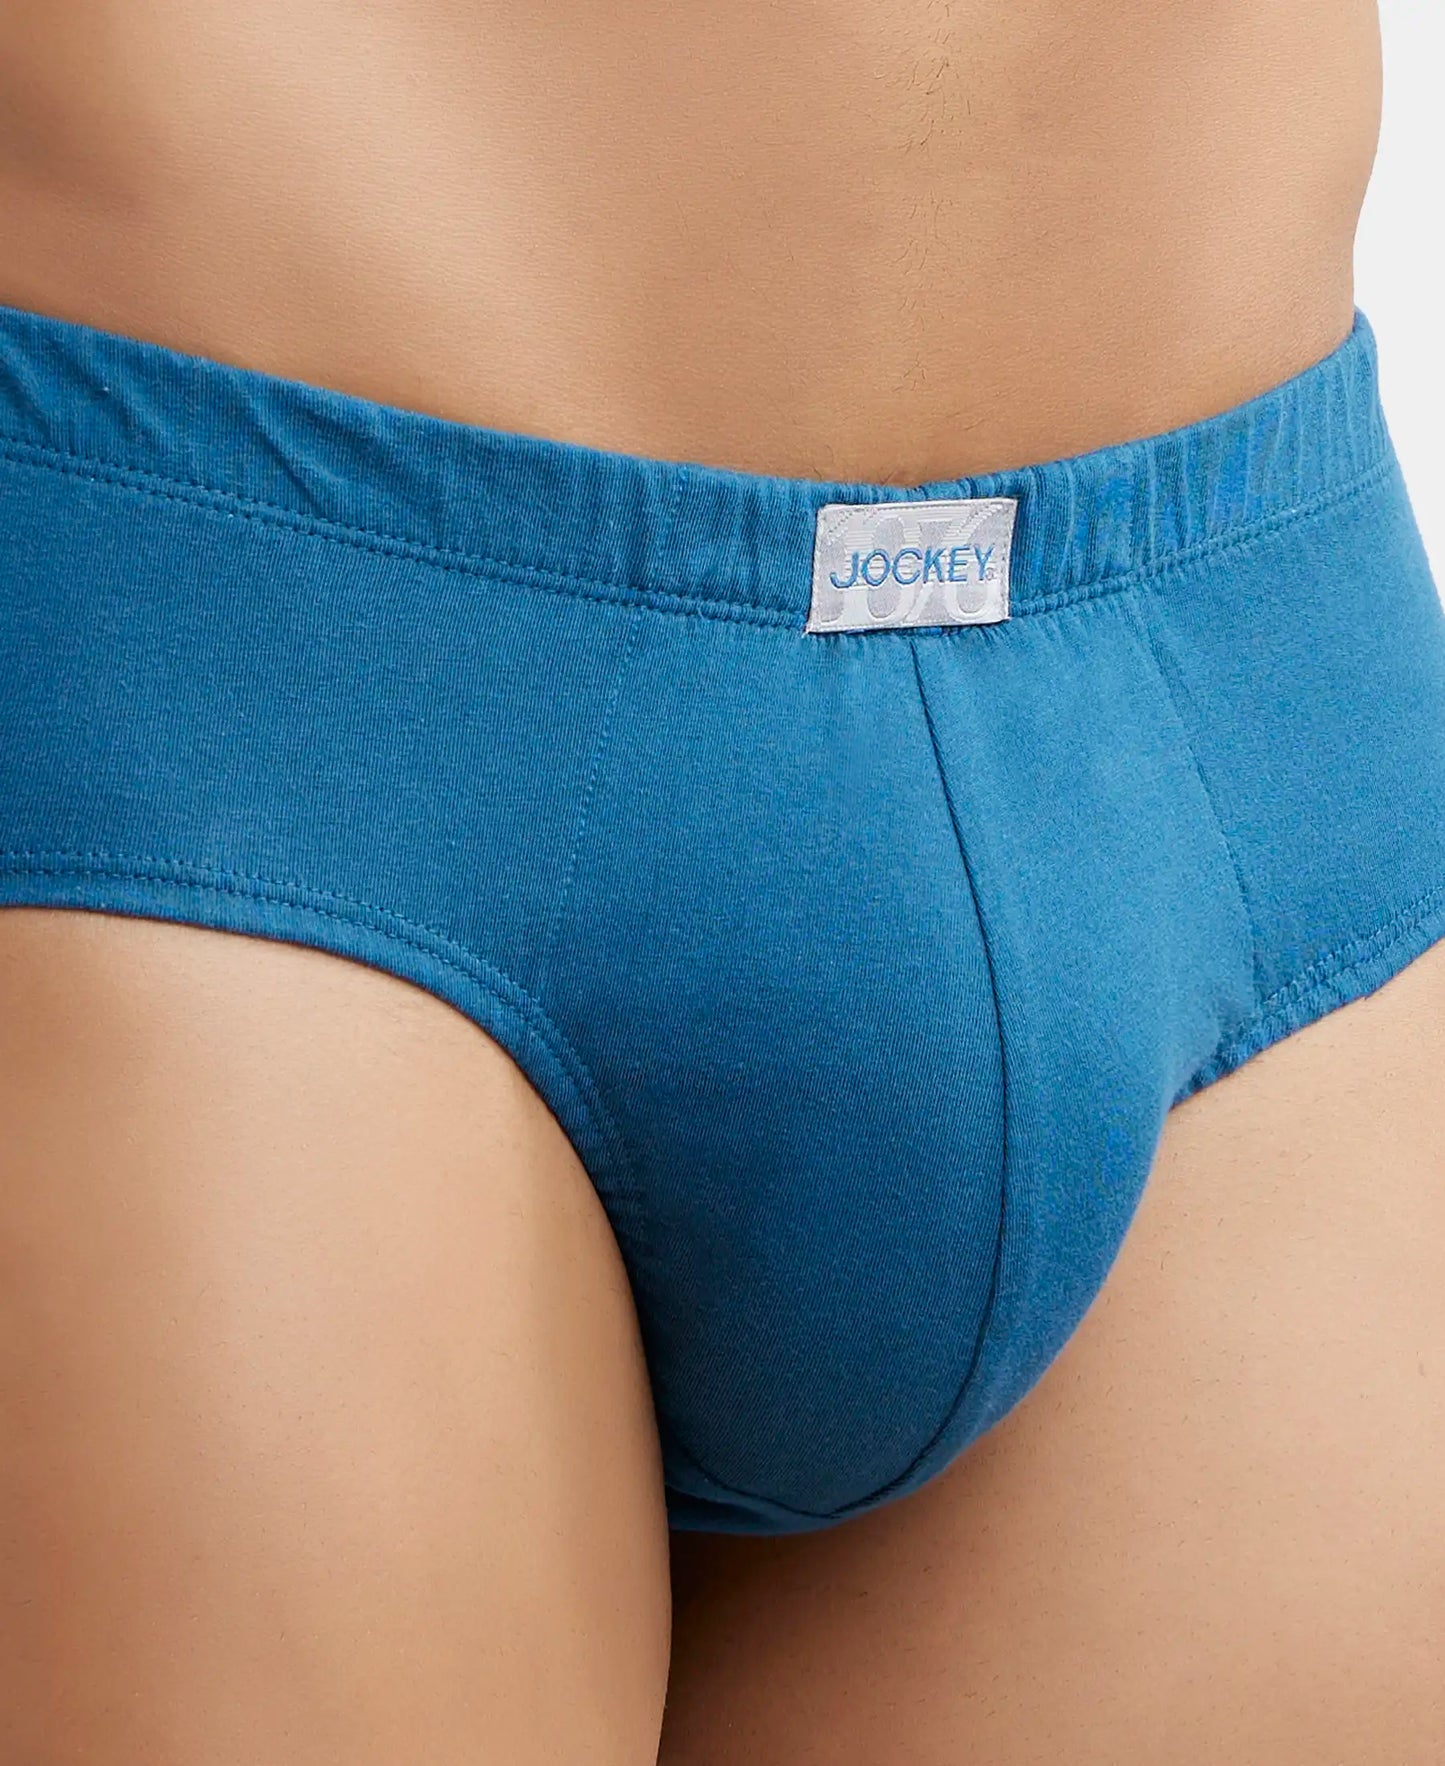 Super Combed Cotton Solid Brief with Ultrasoft Concealed Waistband - Seaport Teal (Pack of 2)